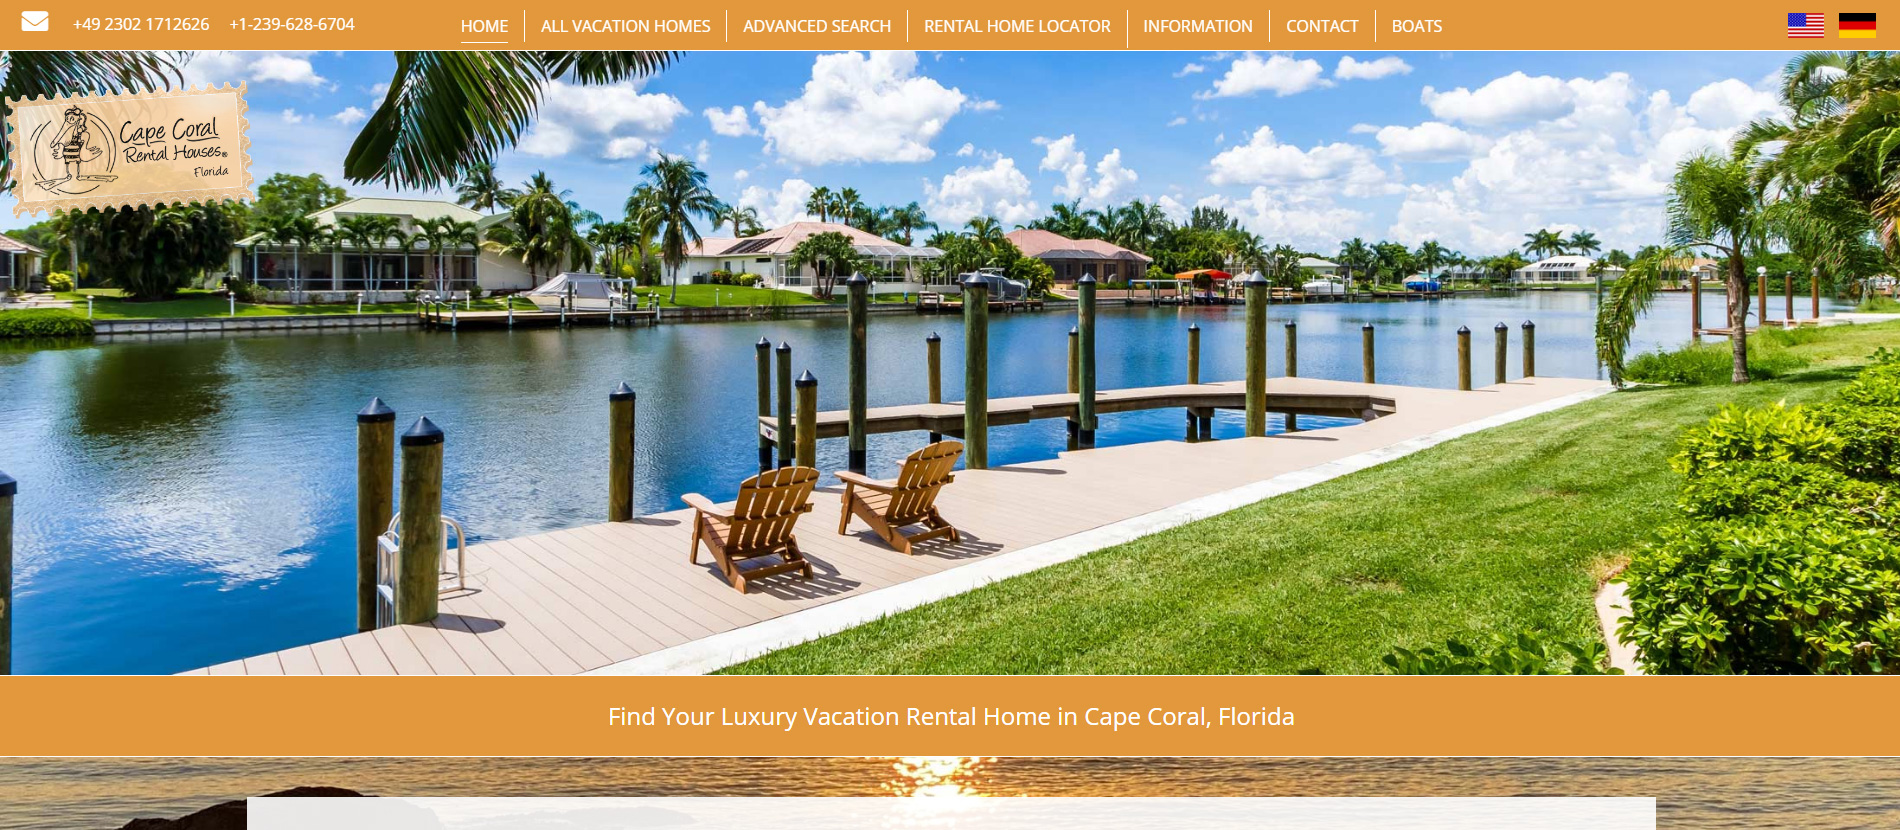 Cape Coral Rental Houses